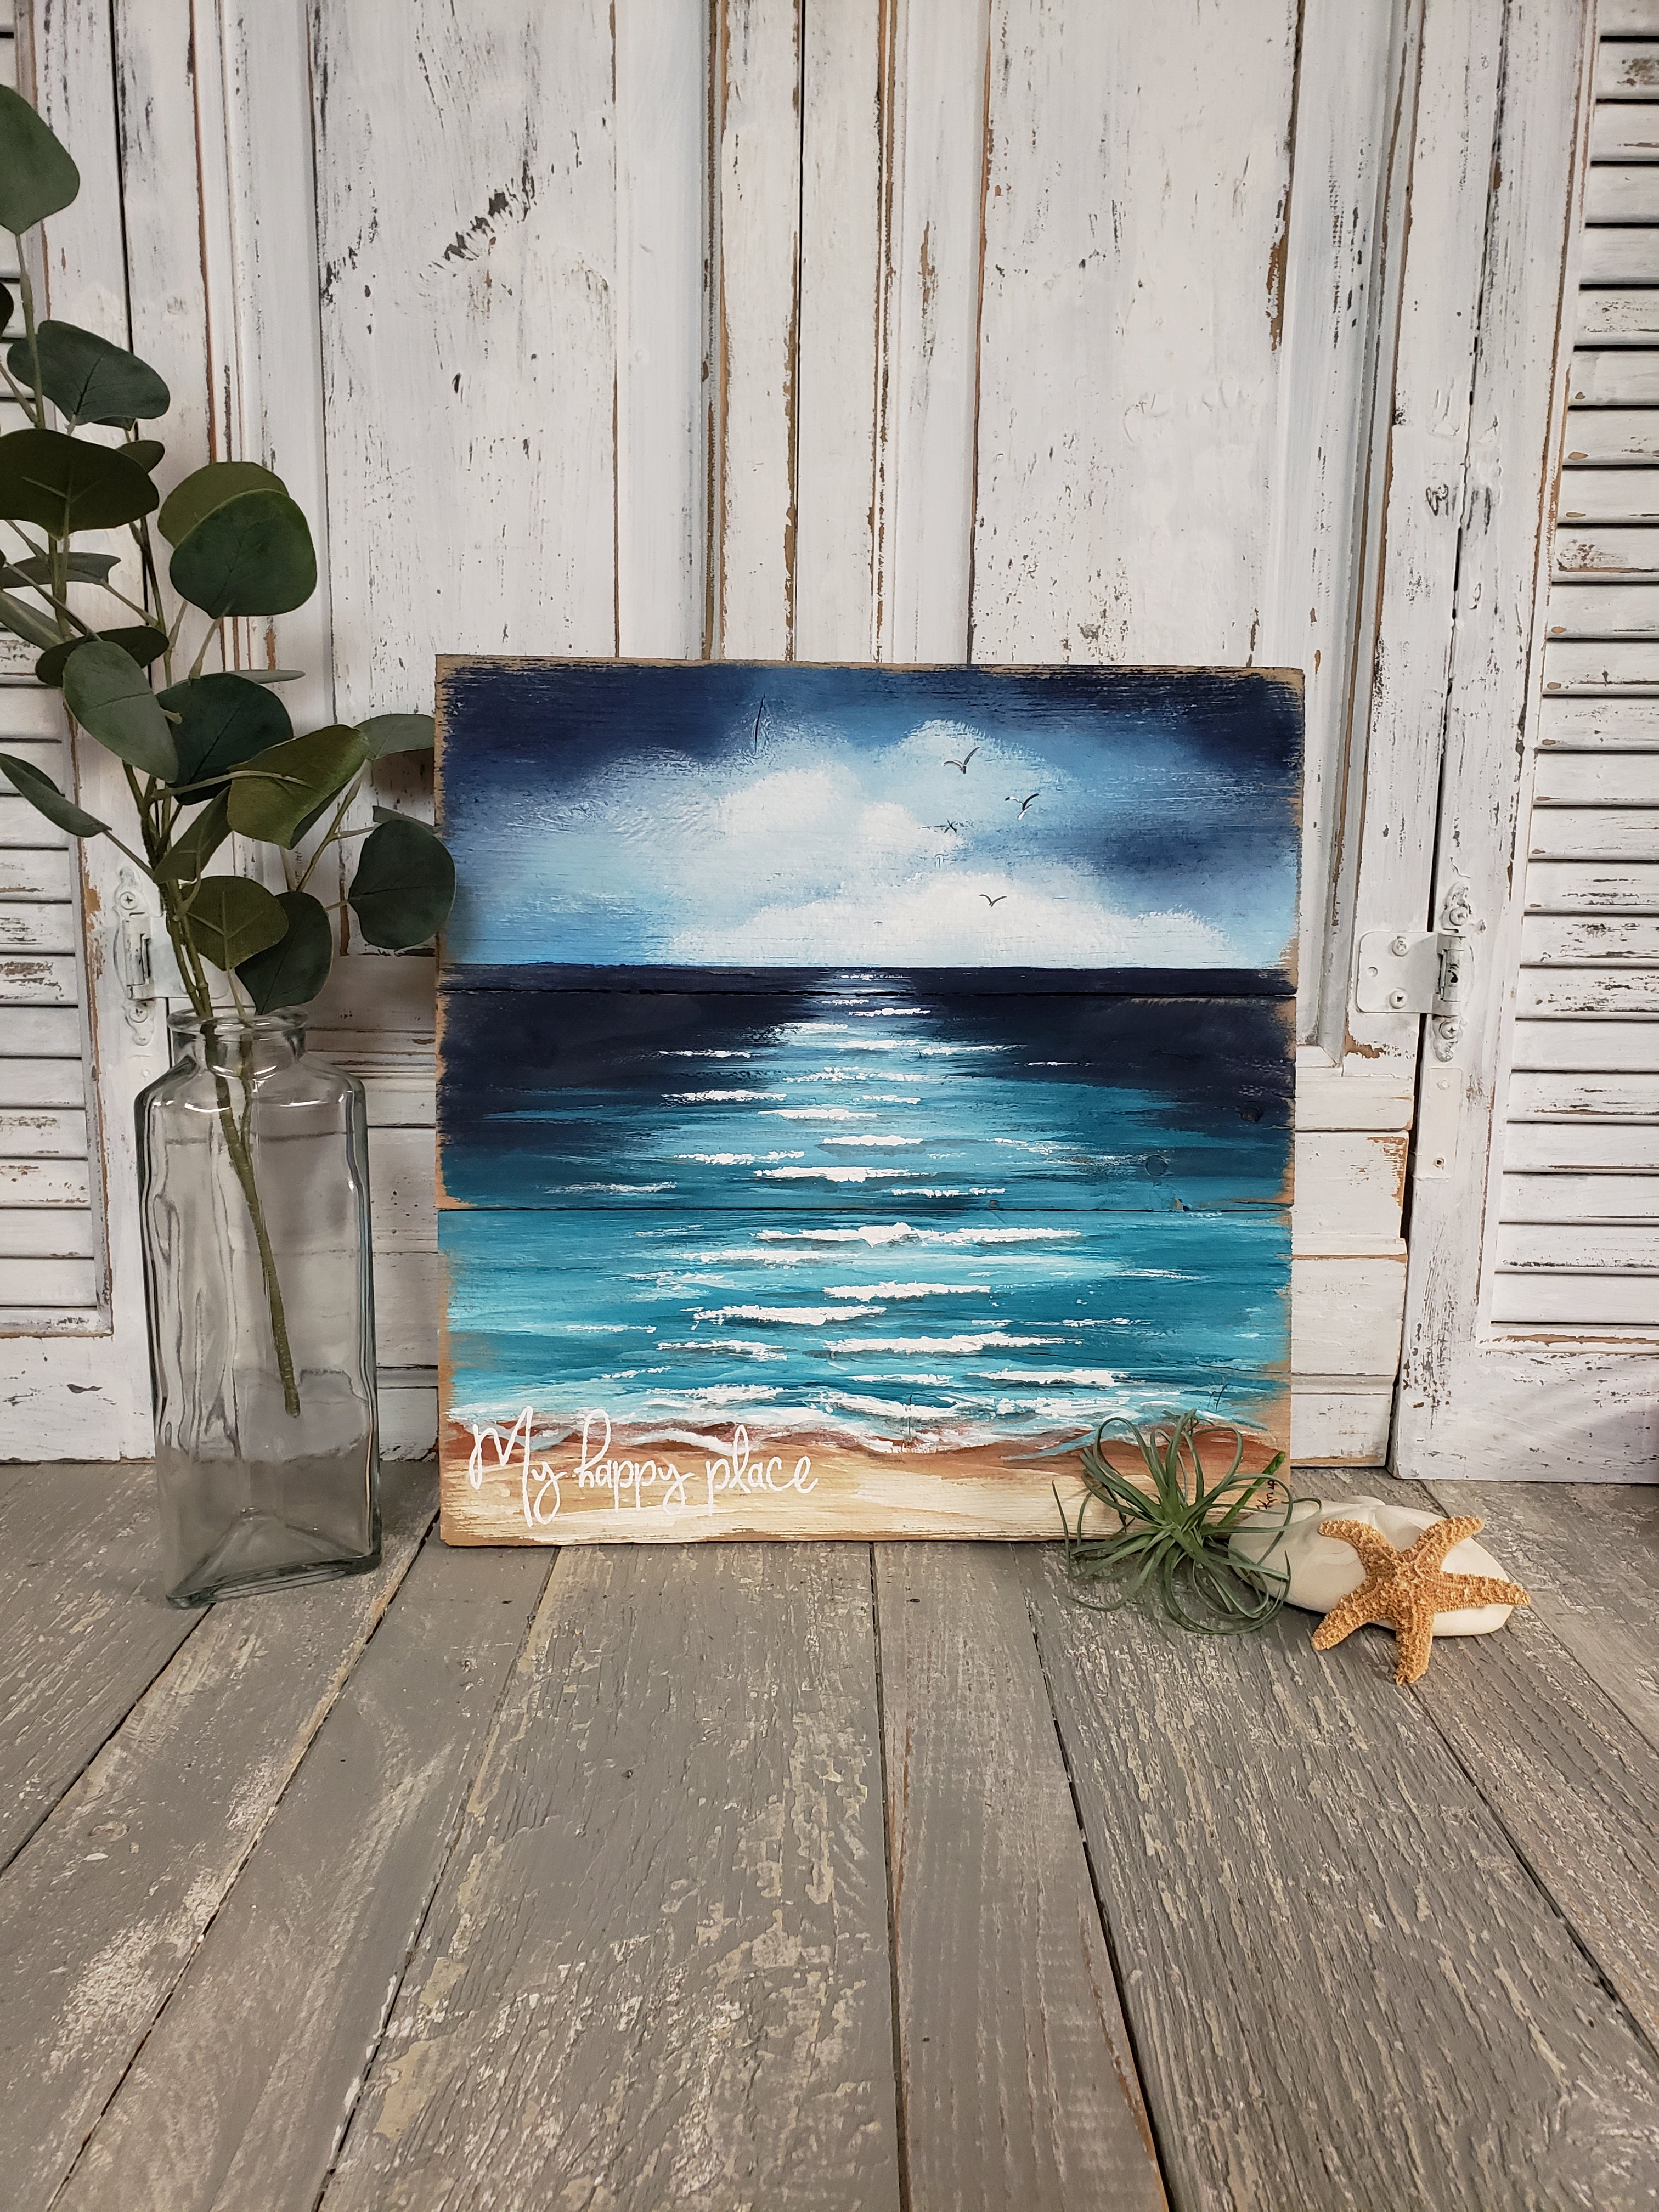 Hand painted beach pallet art, Reclaimed wood cottage decor, my happy place